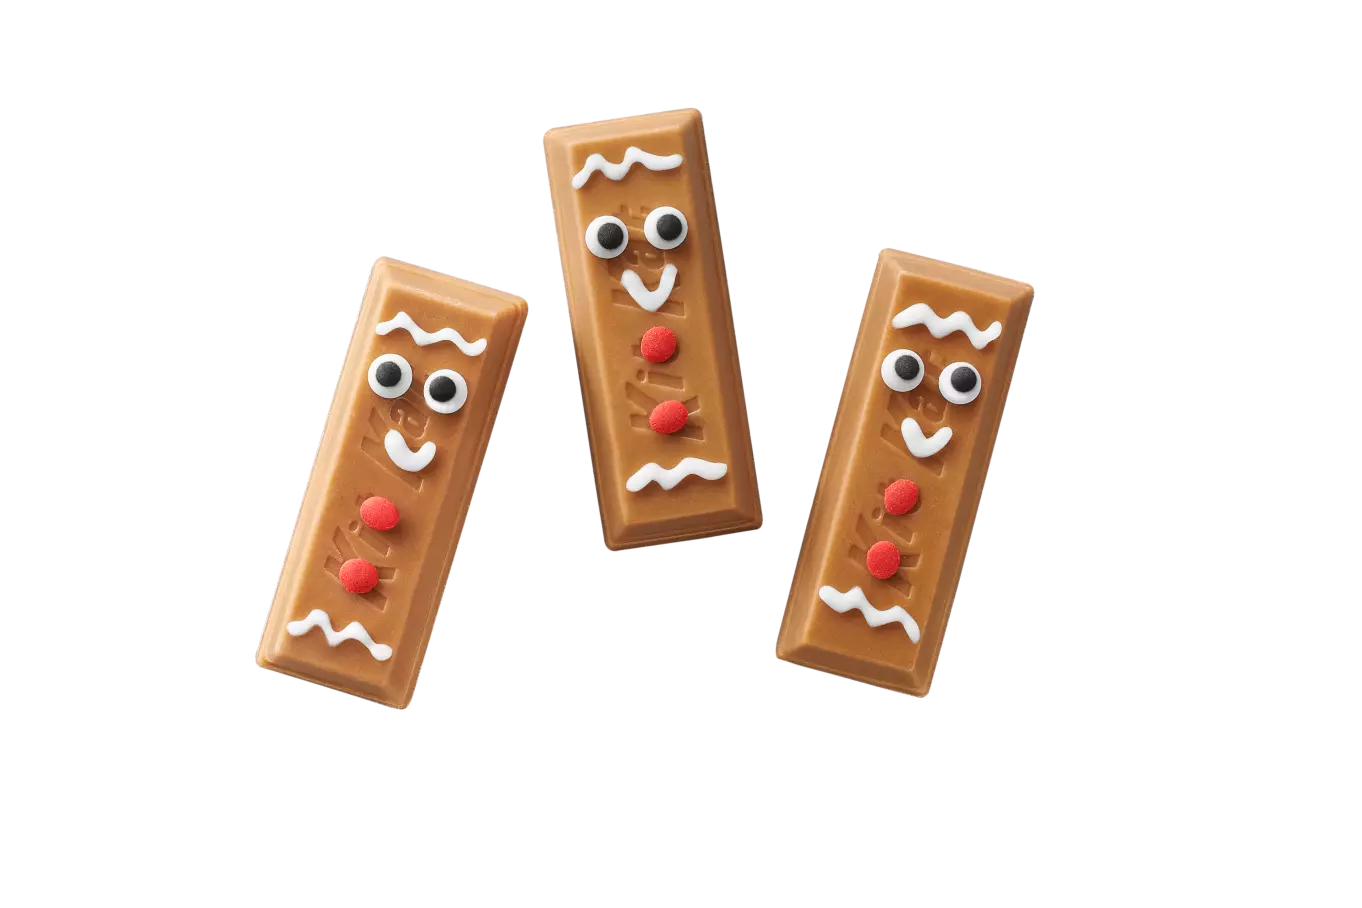 KIT KAT® Gingerbread Cookie Candy Bars decorated with icing